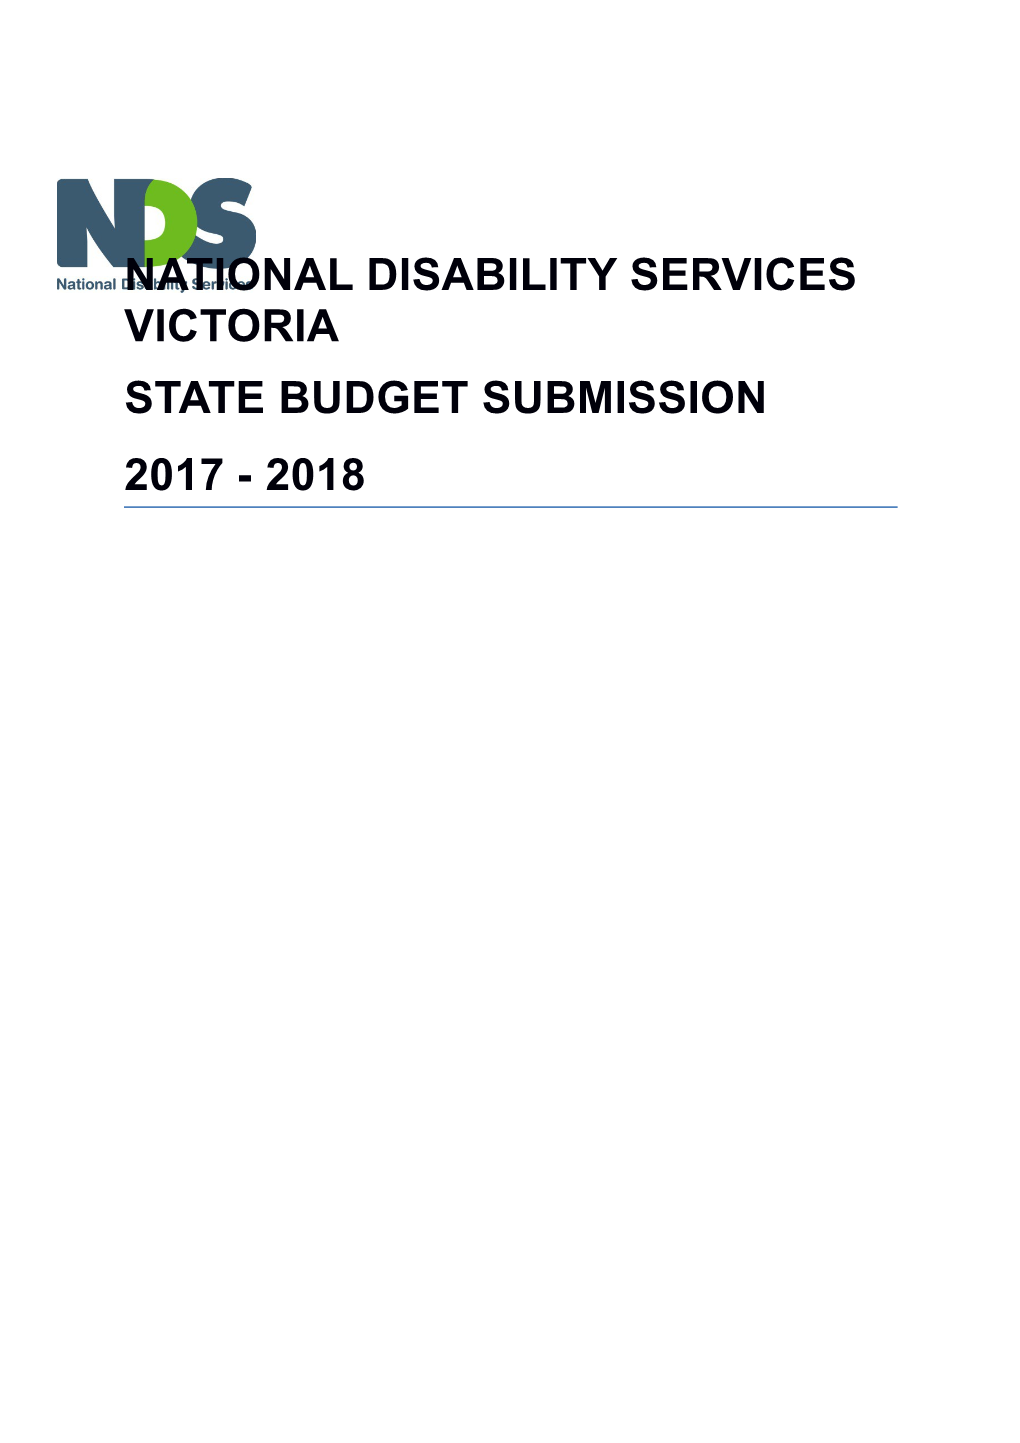 NATIONAL DISABILITY SERVICES VICTORIA X000d STATE BUDGET SUBMISSION X000d 2017 - 2018